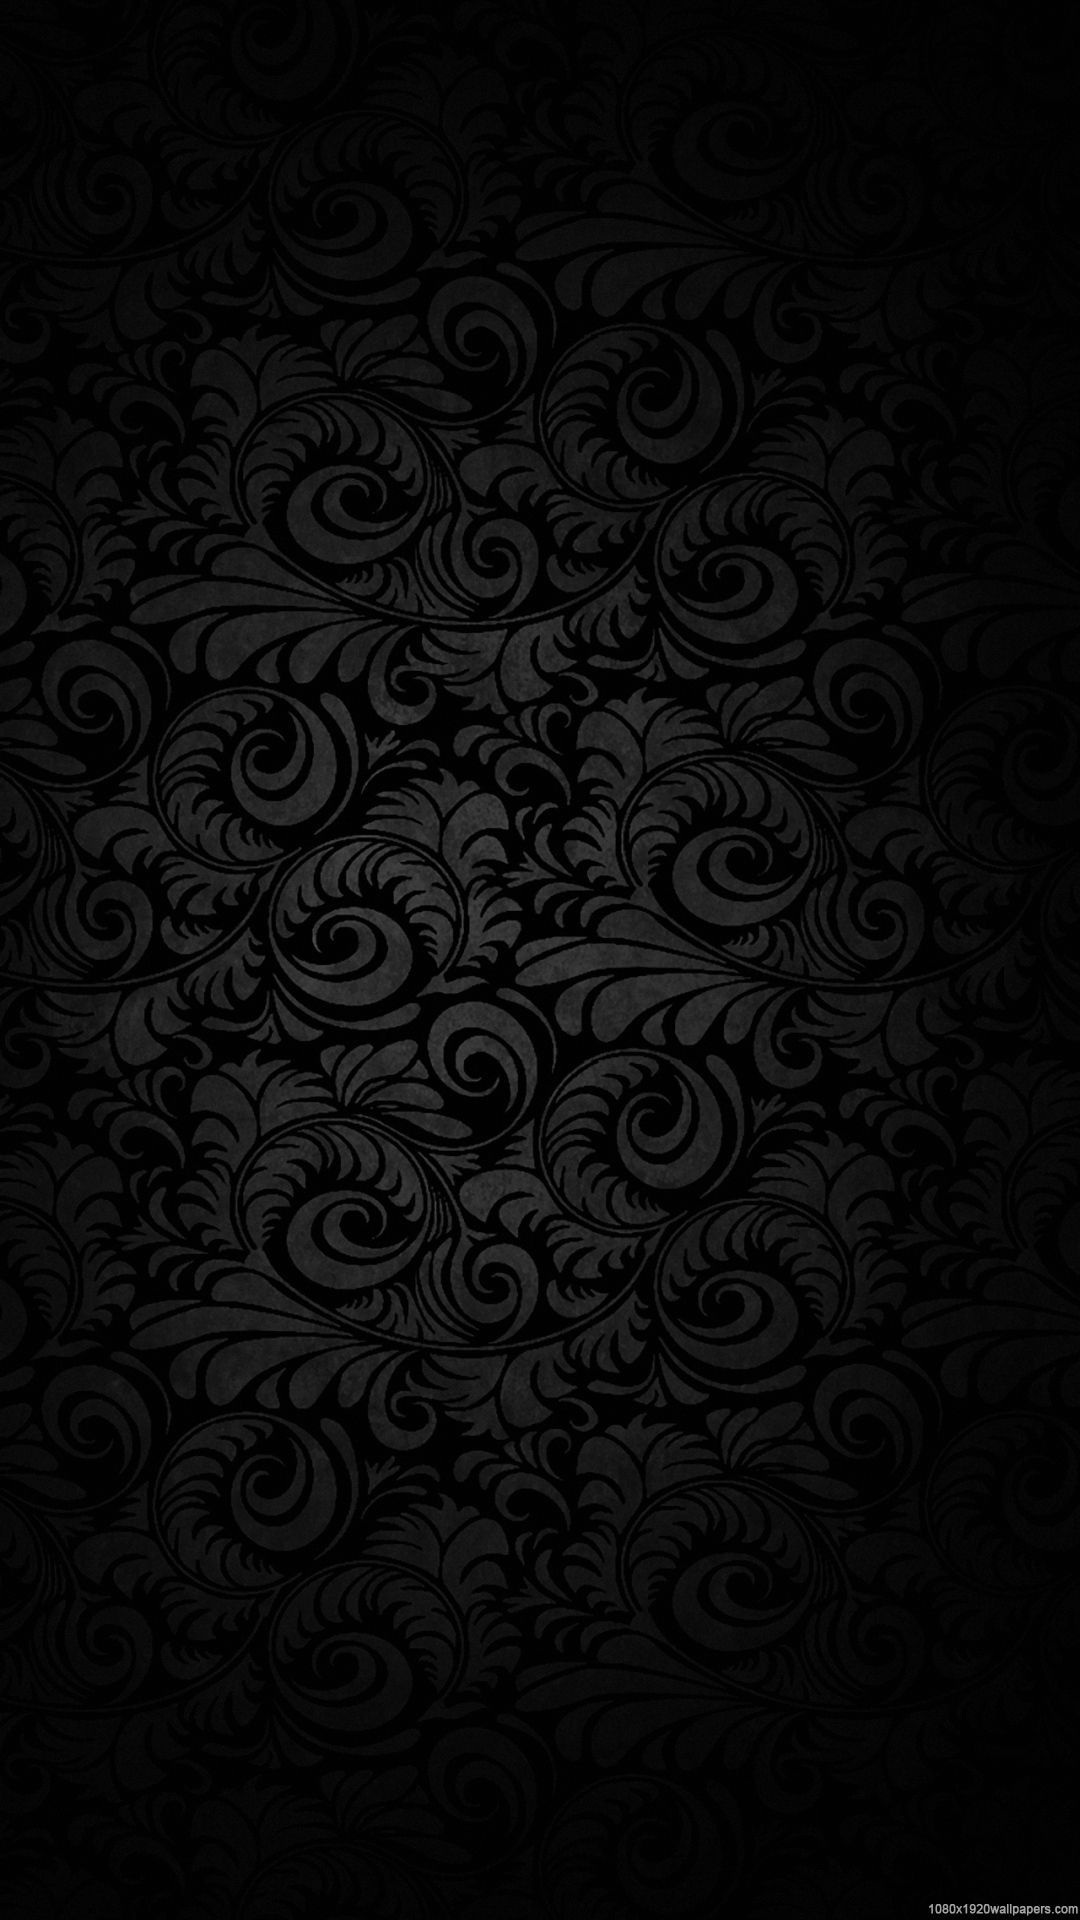 Black Solid Phone Wallpapers - Wallpaper Cave